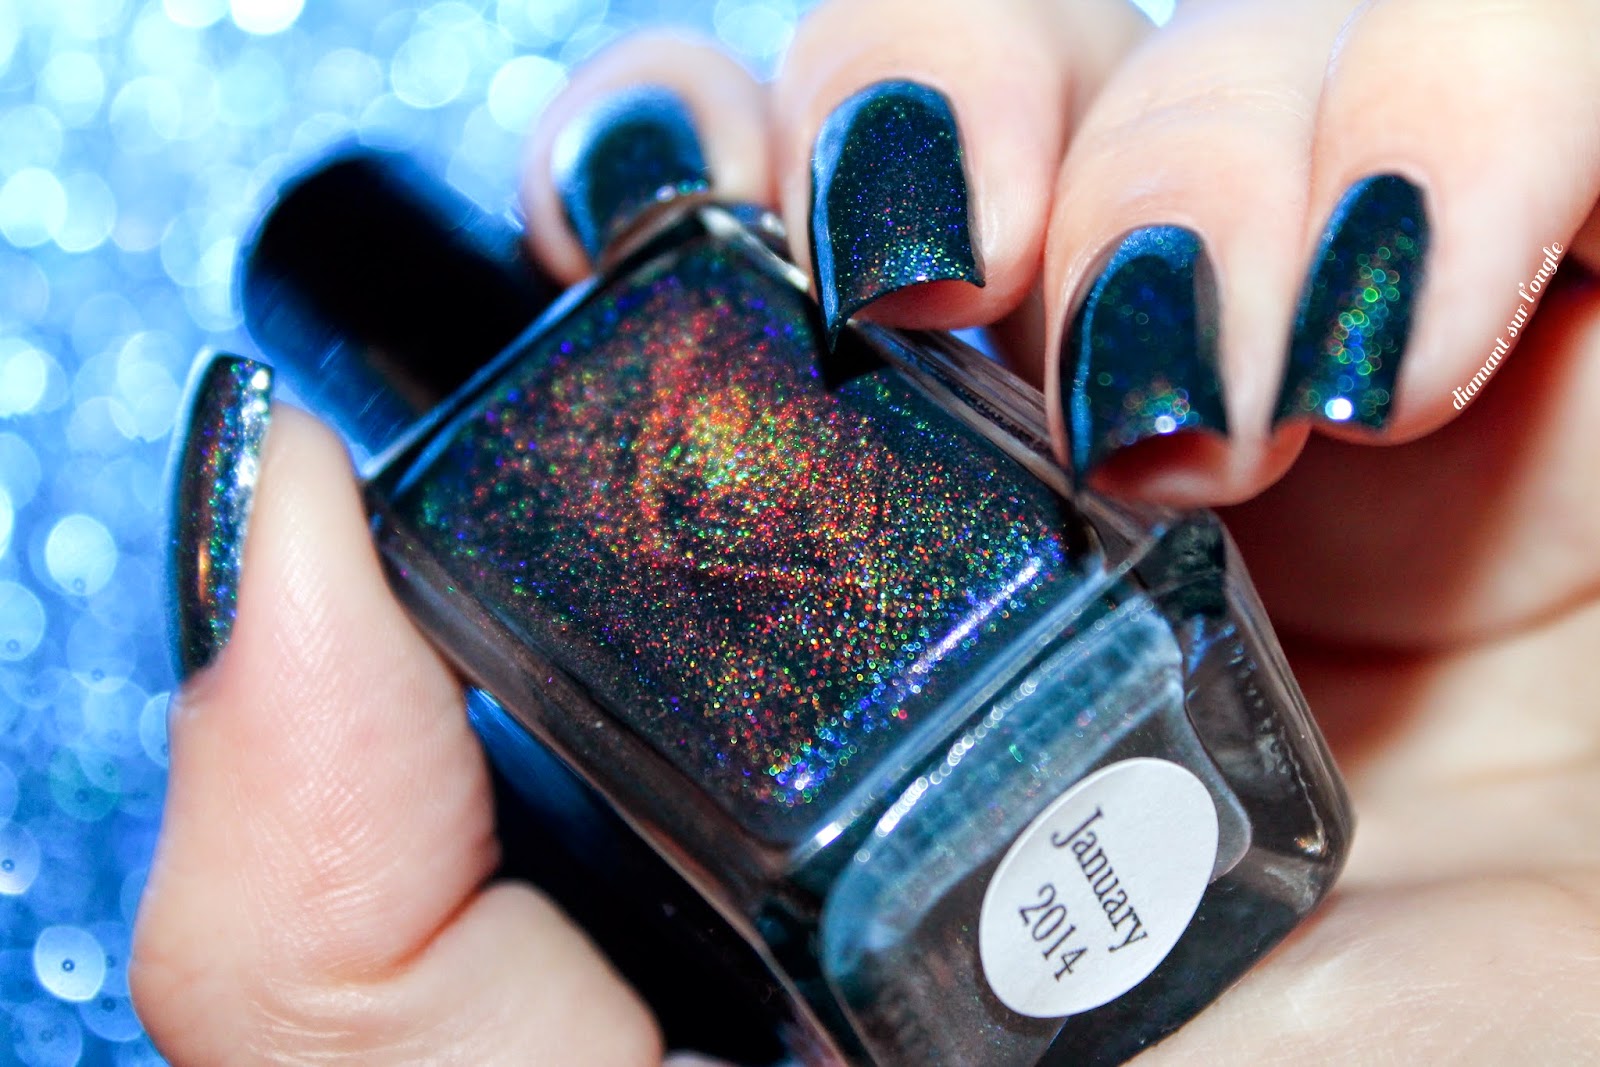 Swatch of January 2014 by Enchanted Polish